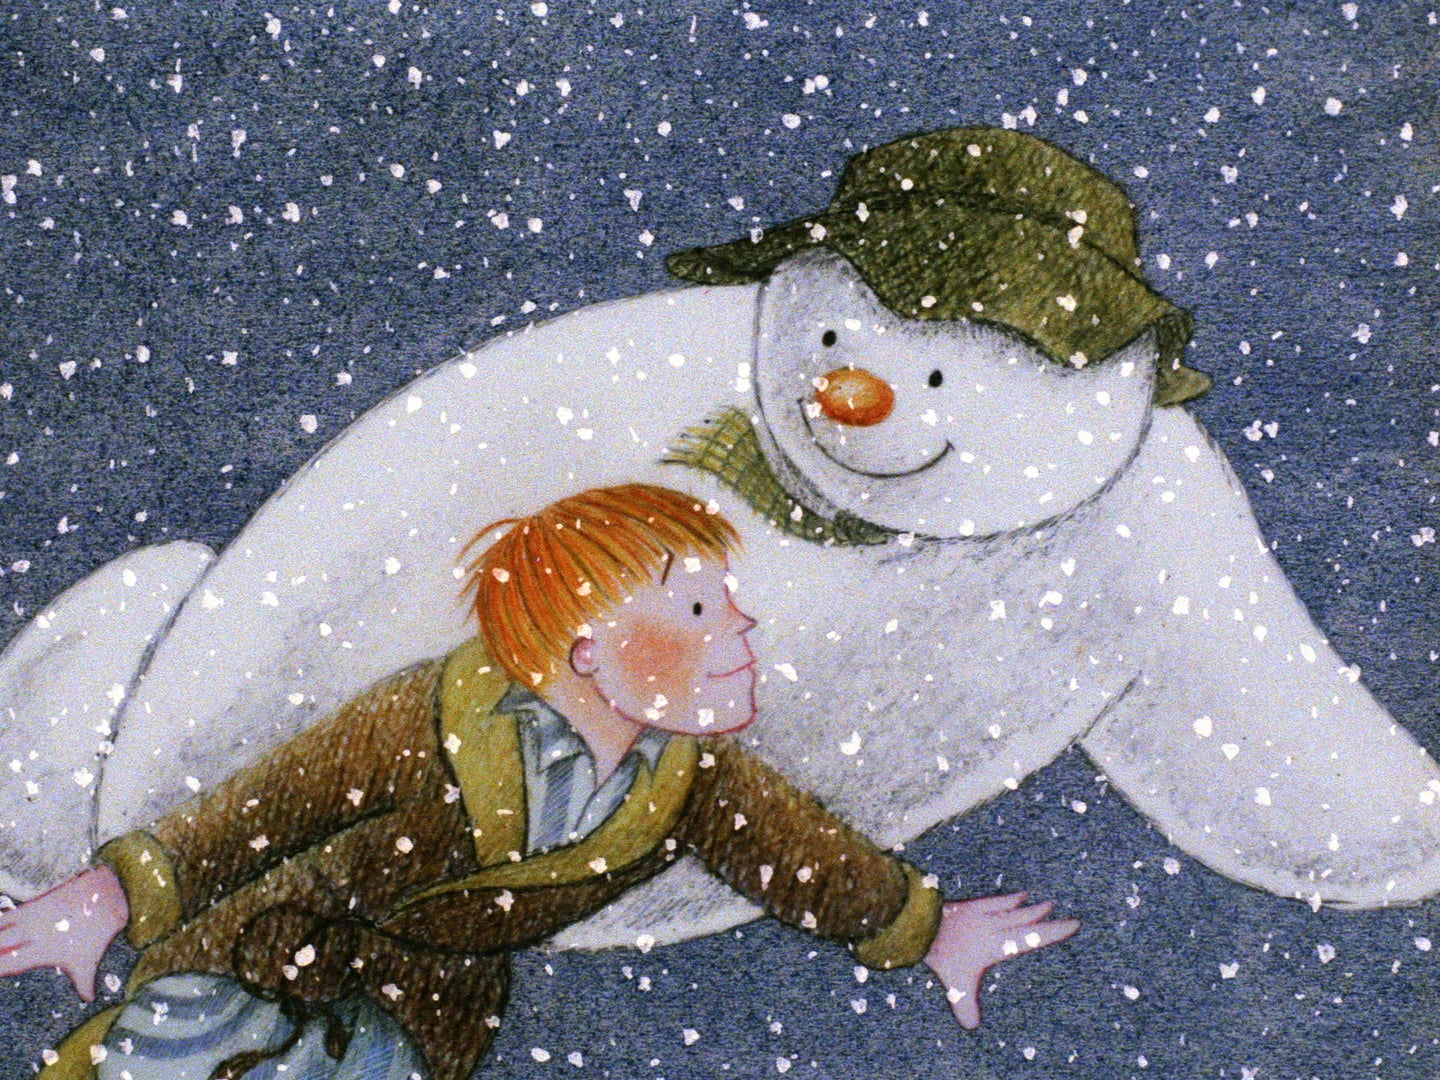 The Snowman is one of the most beloved children’s animations of all time